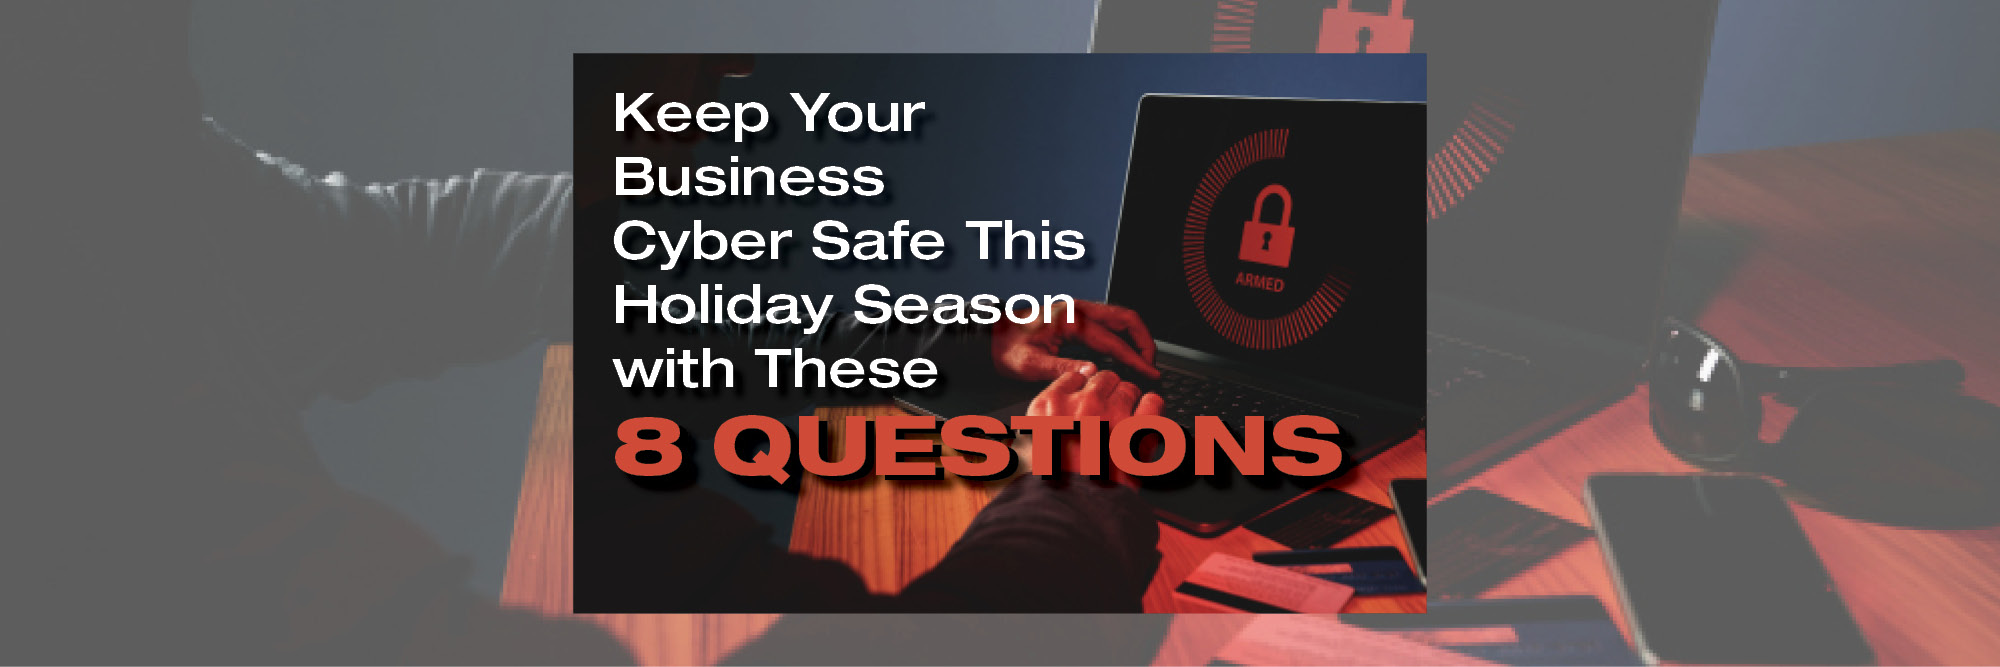 Keep Your Business Cyber Safe This Holiday Season with These 8 Questions